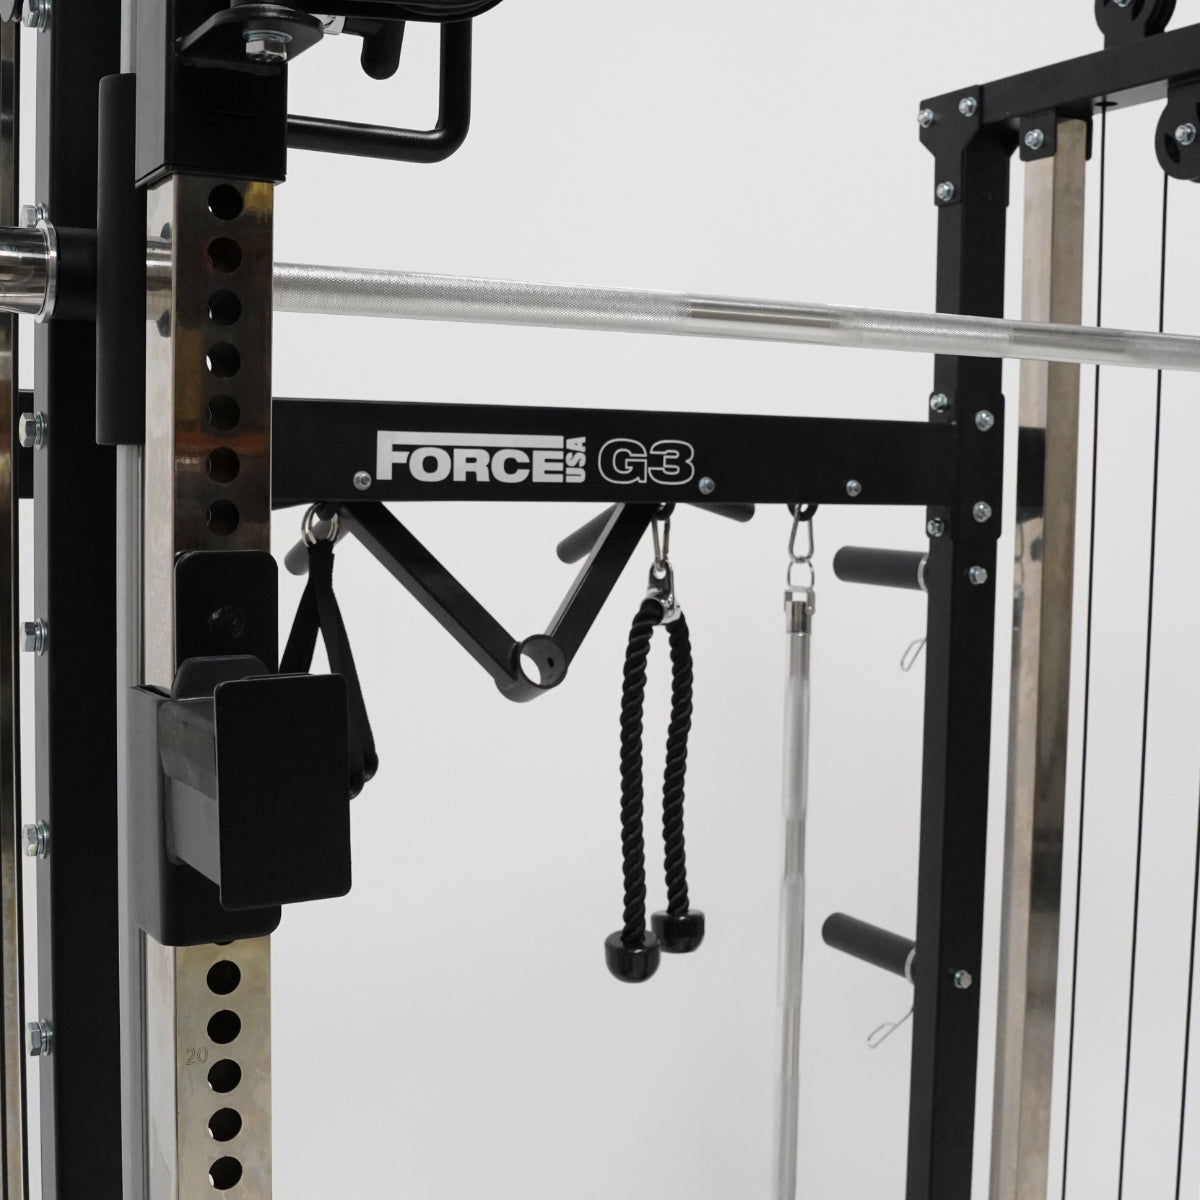 ForceUSA G3 All-in-One Trainer